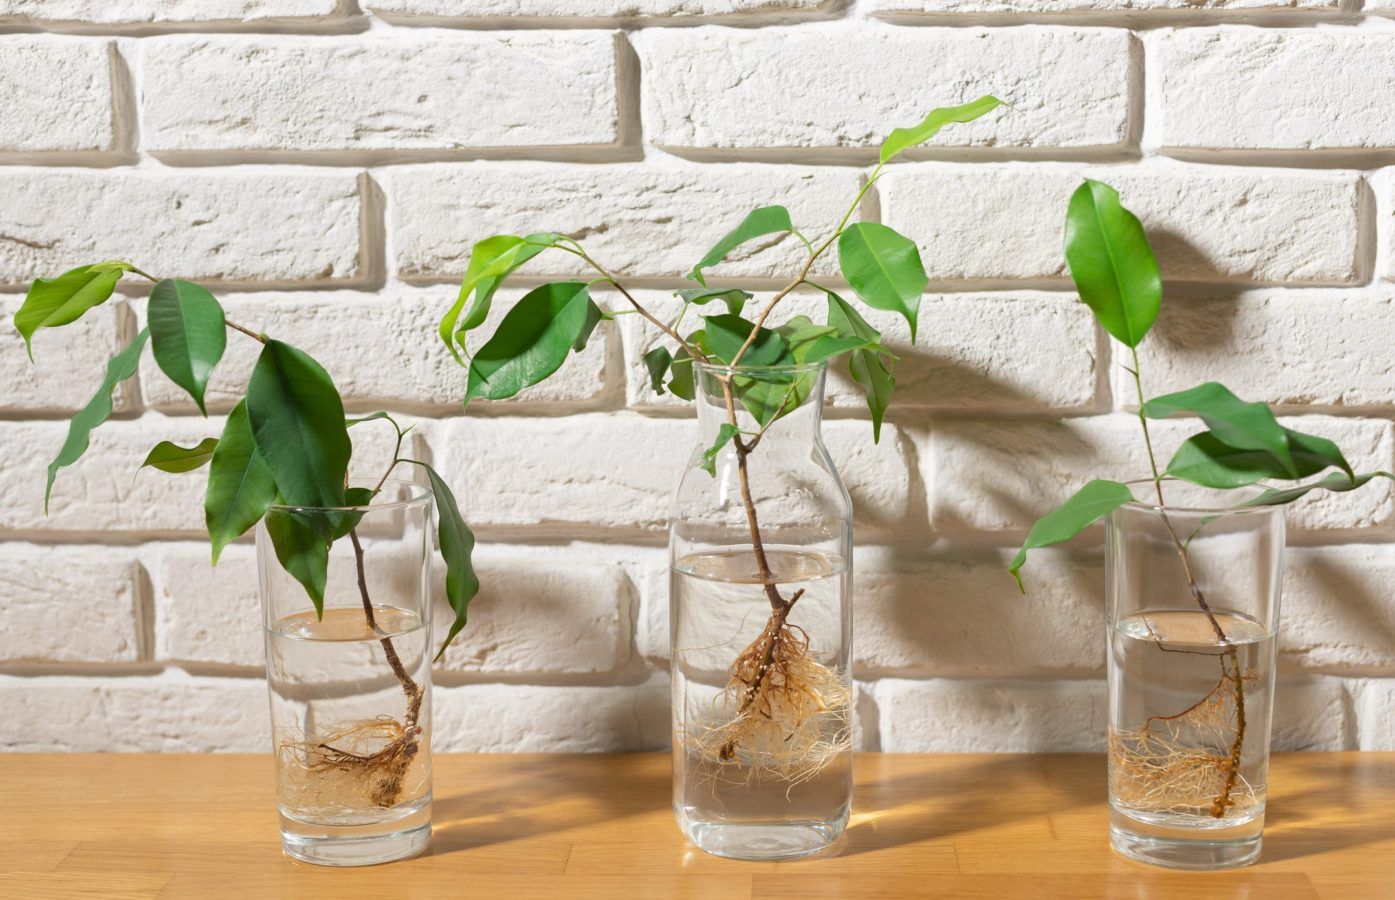 DIY decor 101: How you can grow an indoor water garden in your home